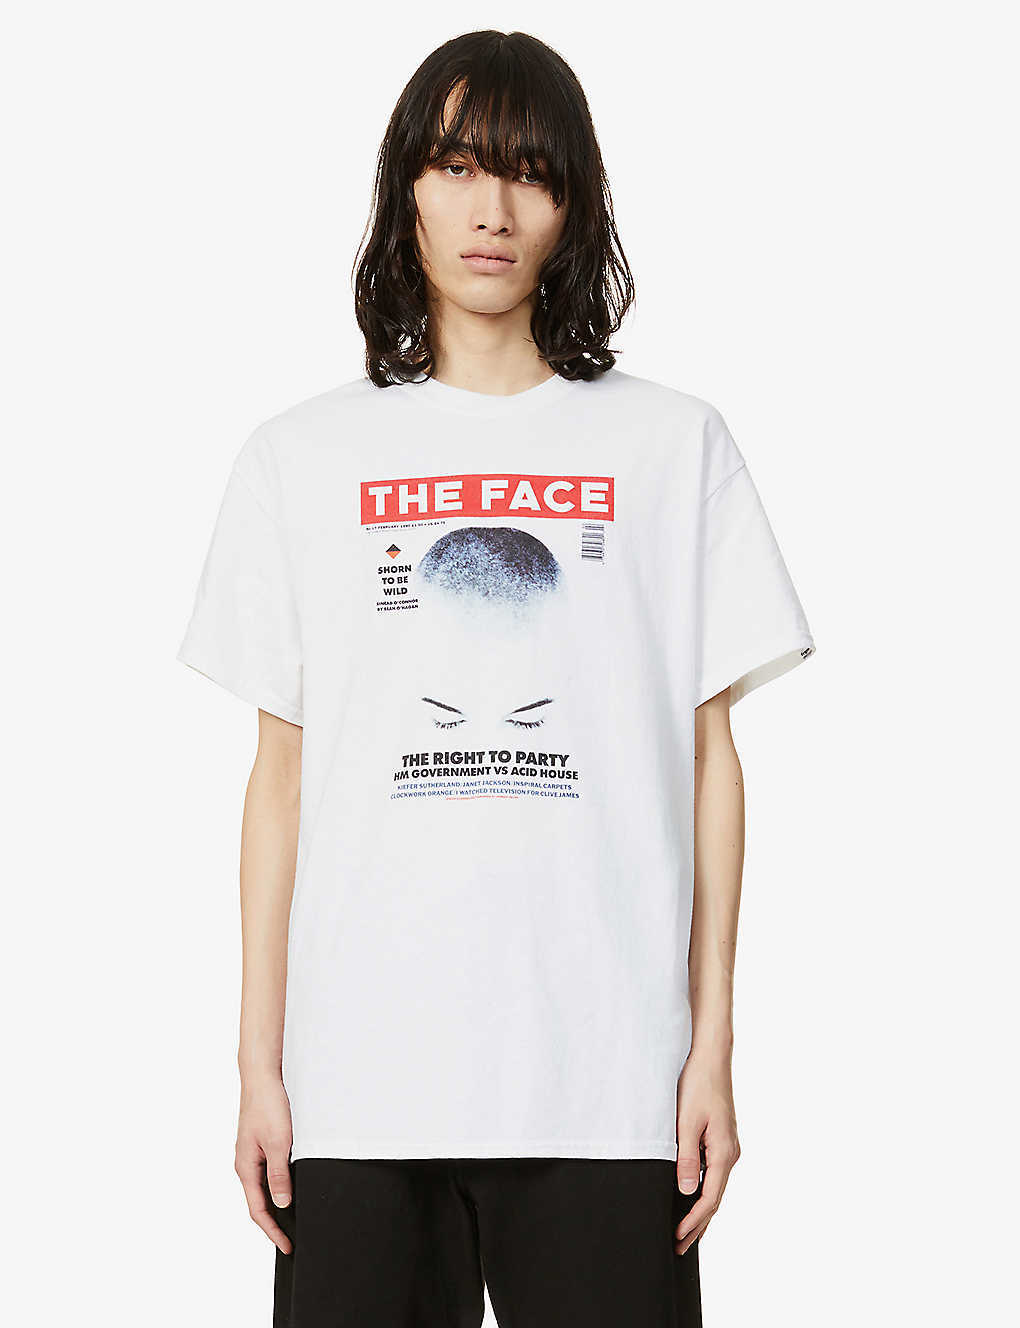 THE FACE X Fragment Design - The Face